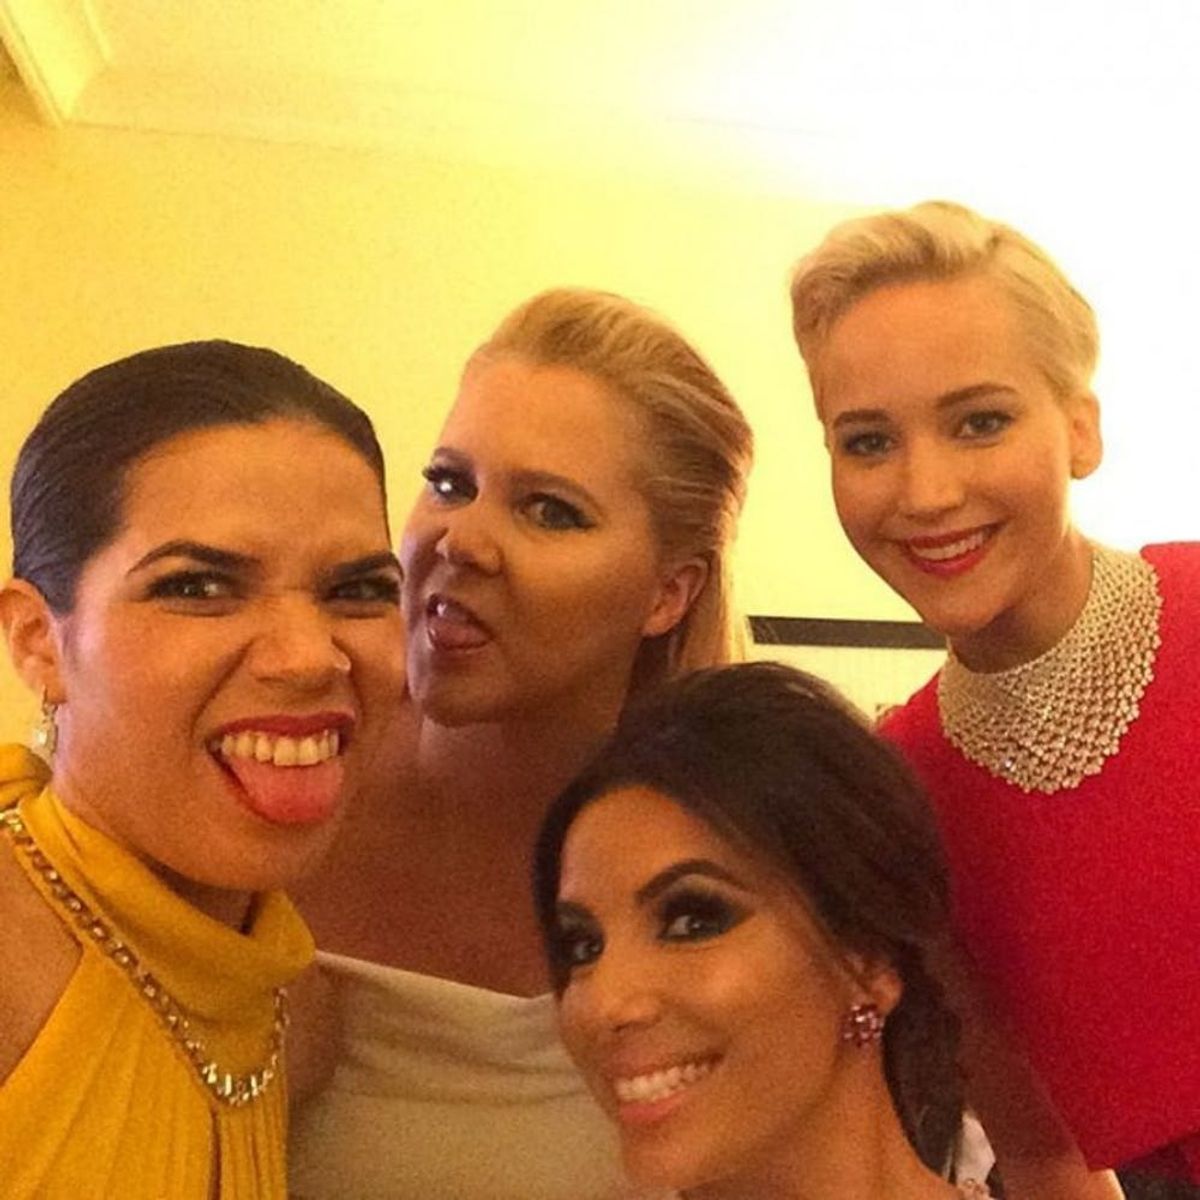 America Ferrera Had the Best Behind-the-Scenes Selfie Game at the Golden Globes